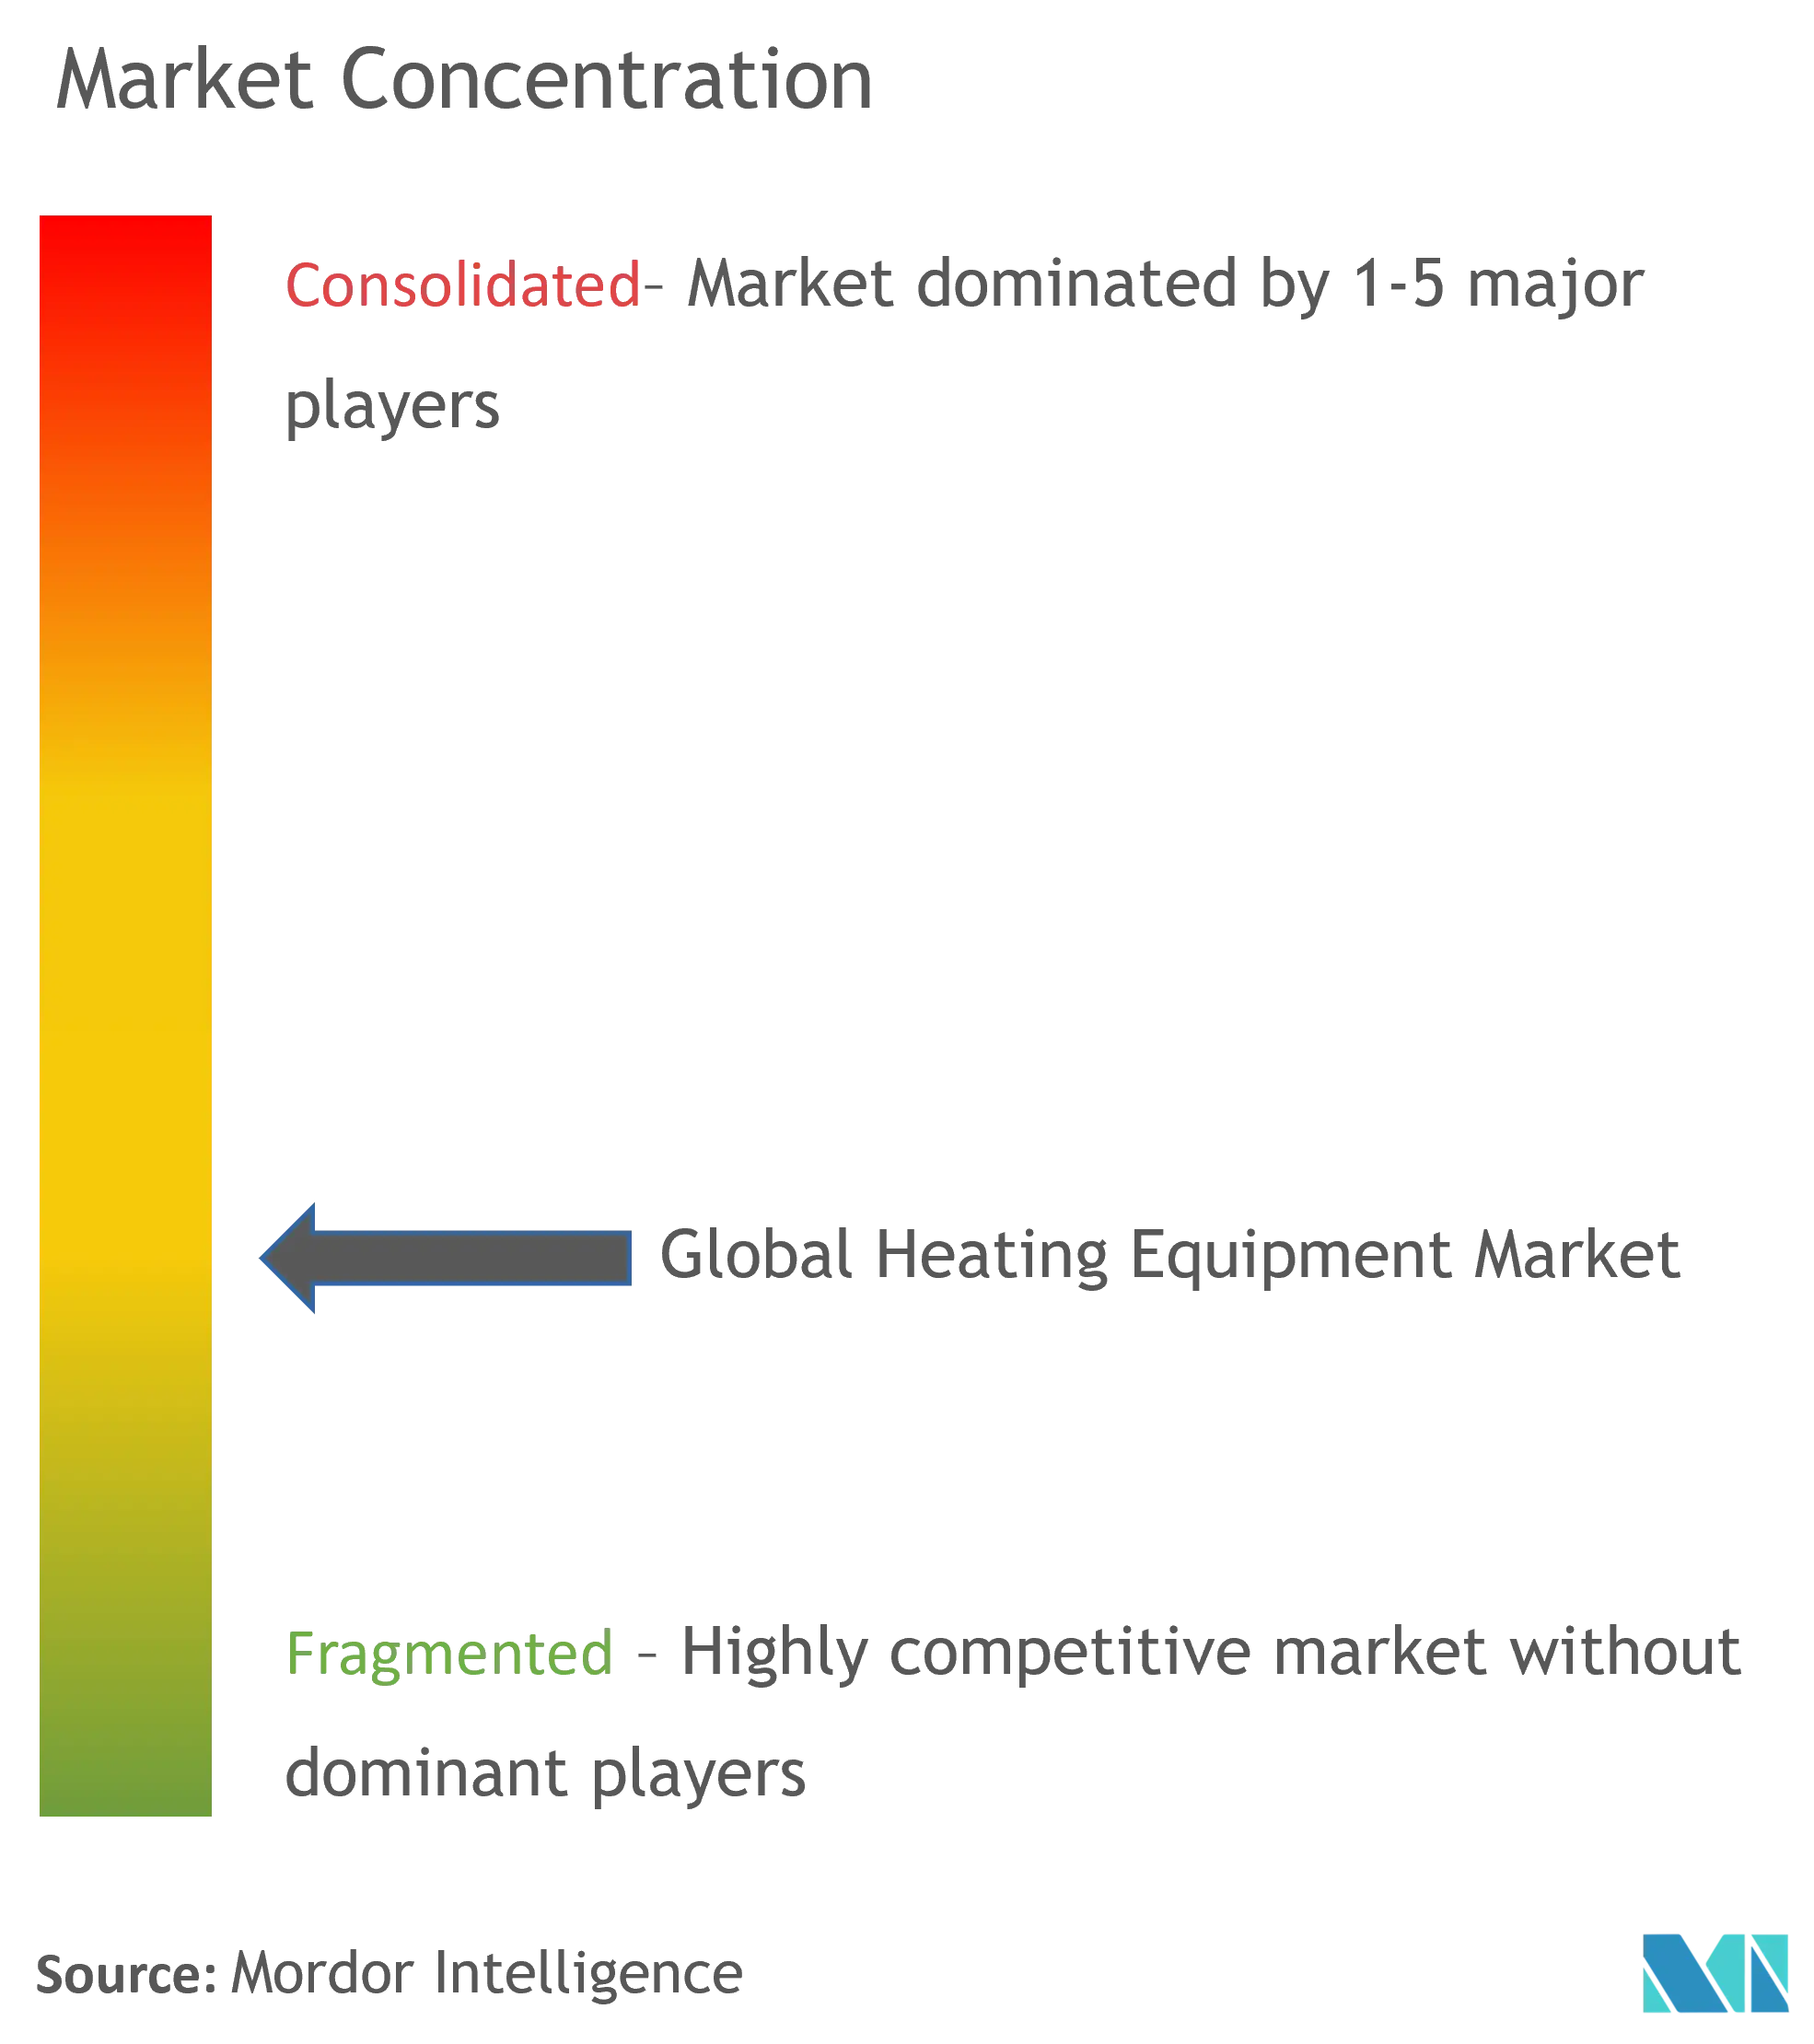 Heating Equipment Market Concentration